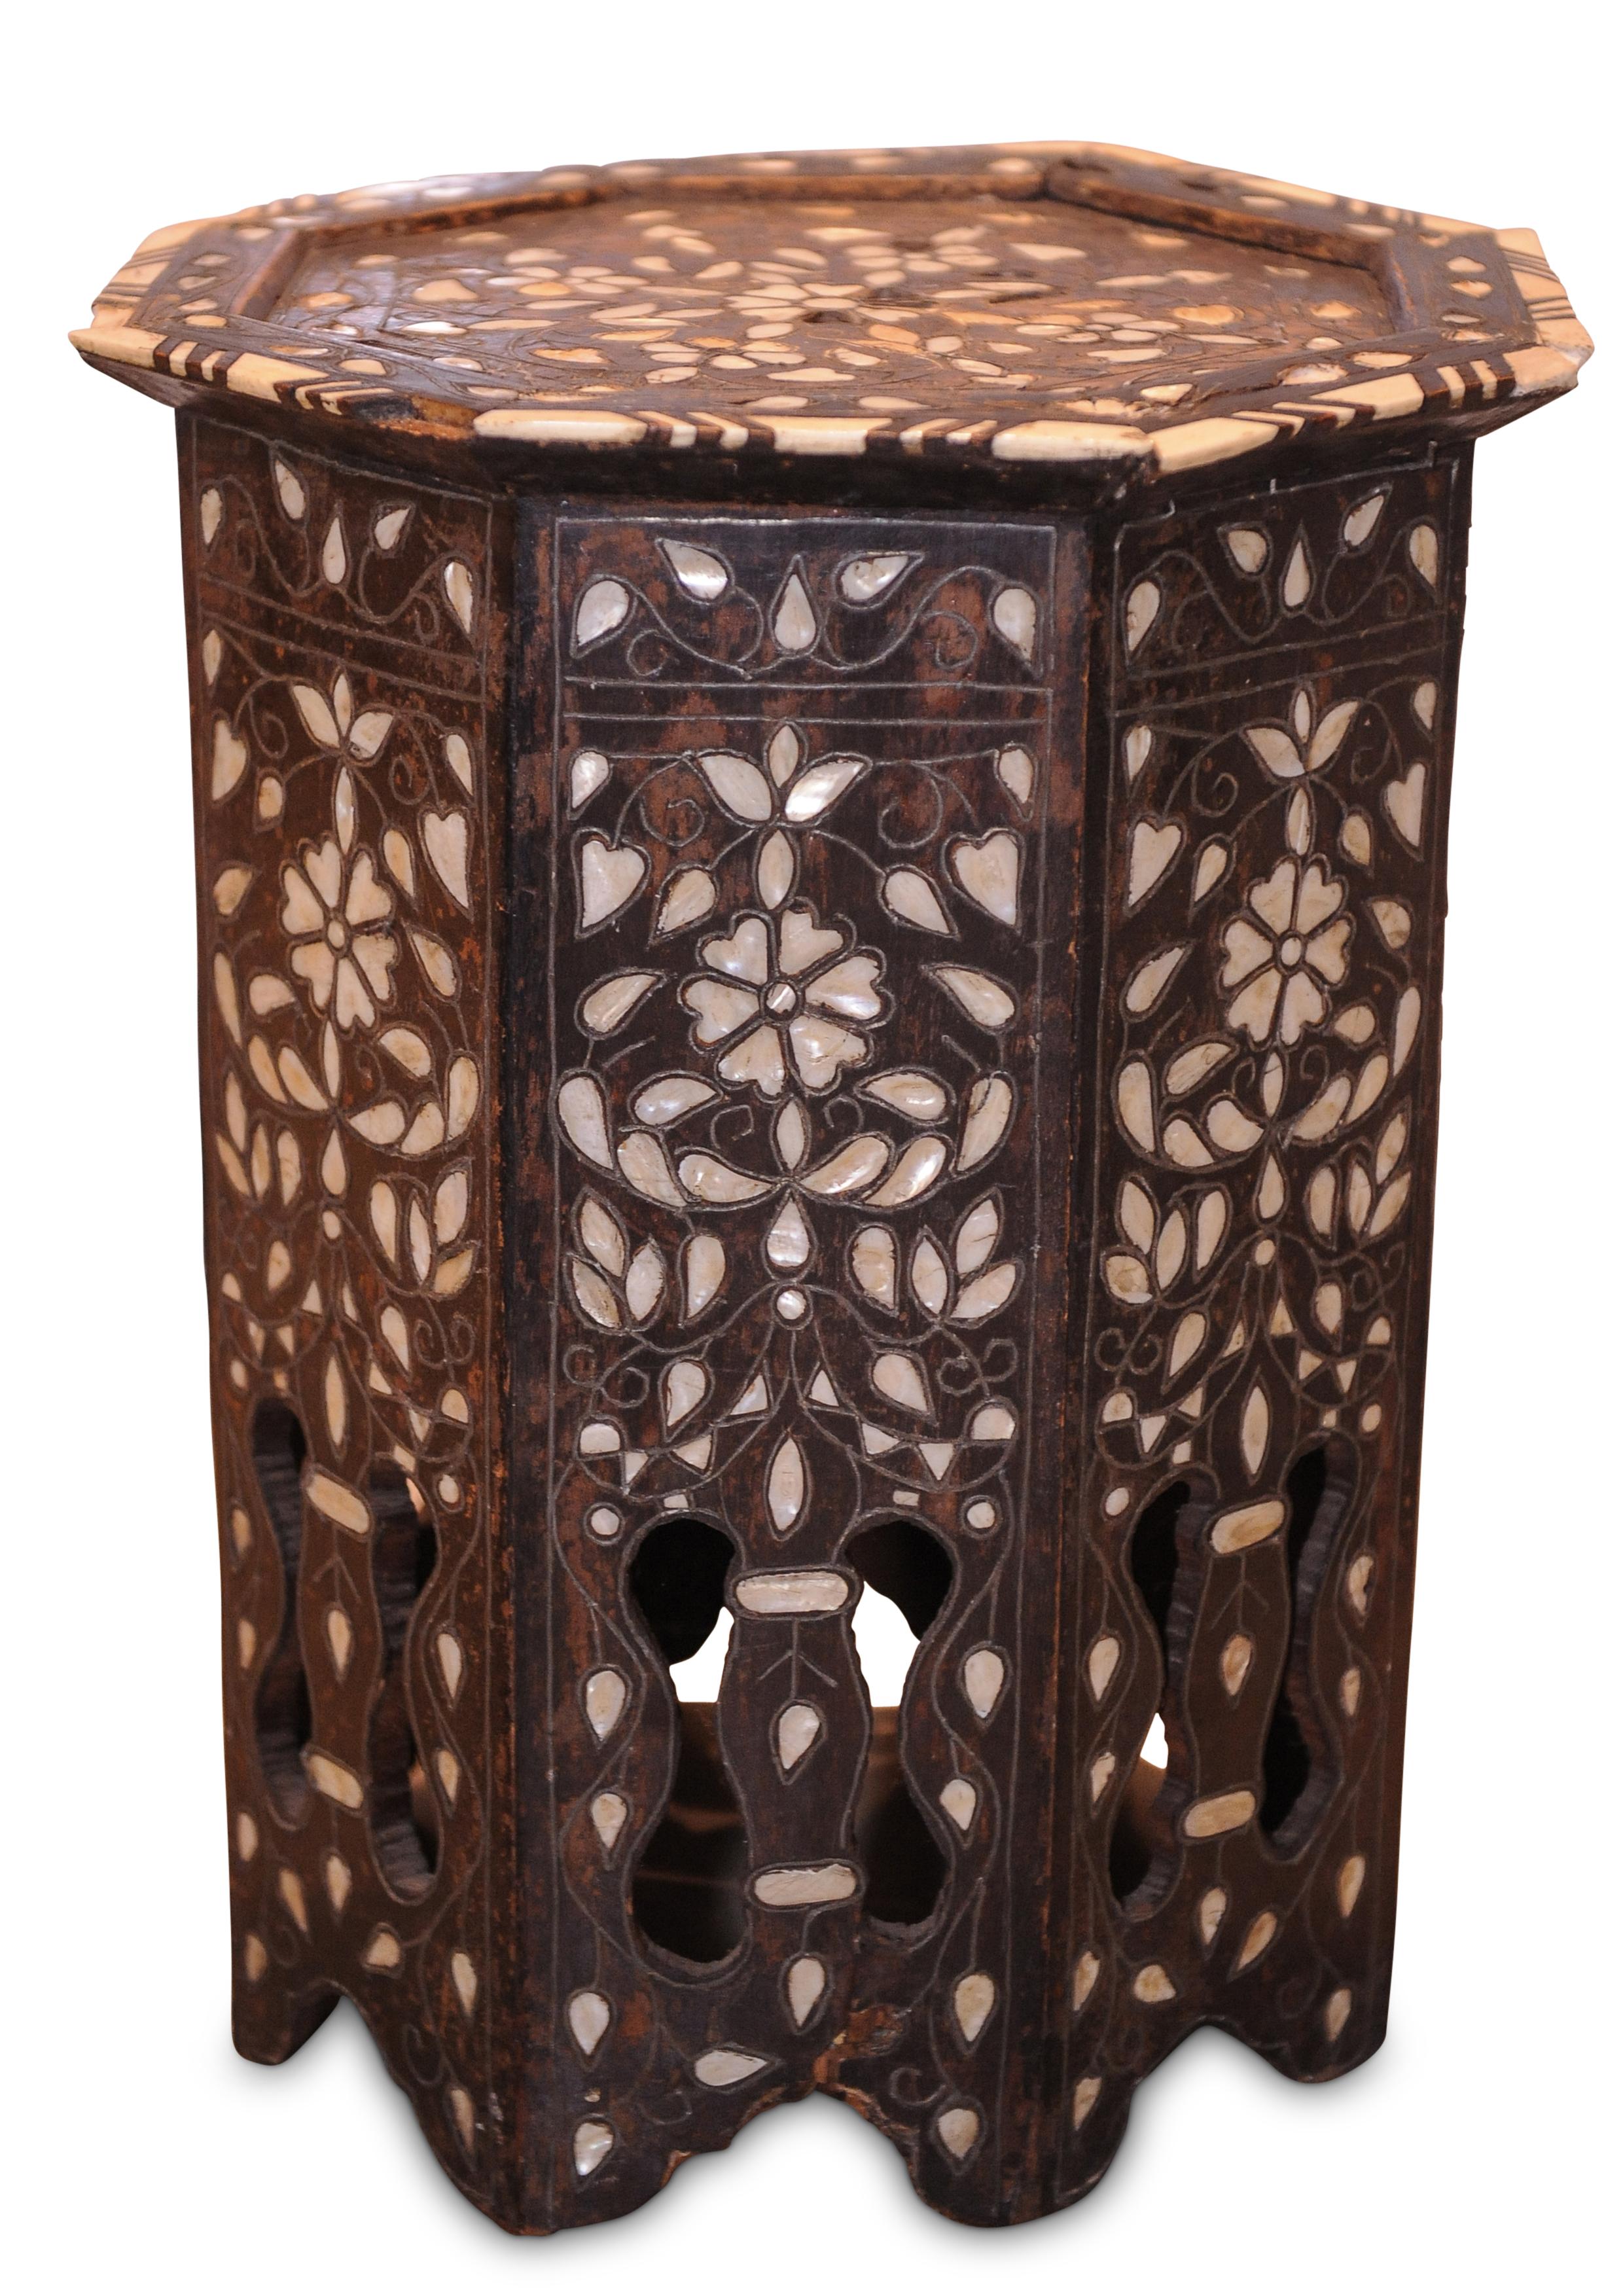 Carved Early 19th Century Moorish Octagonal Tabouret Table with Decorative Elements